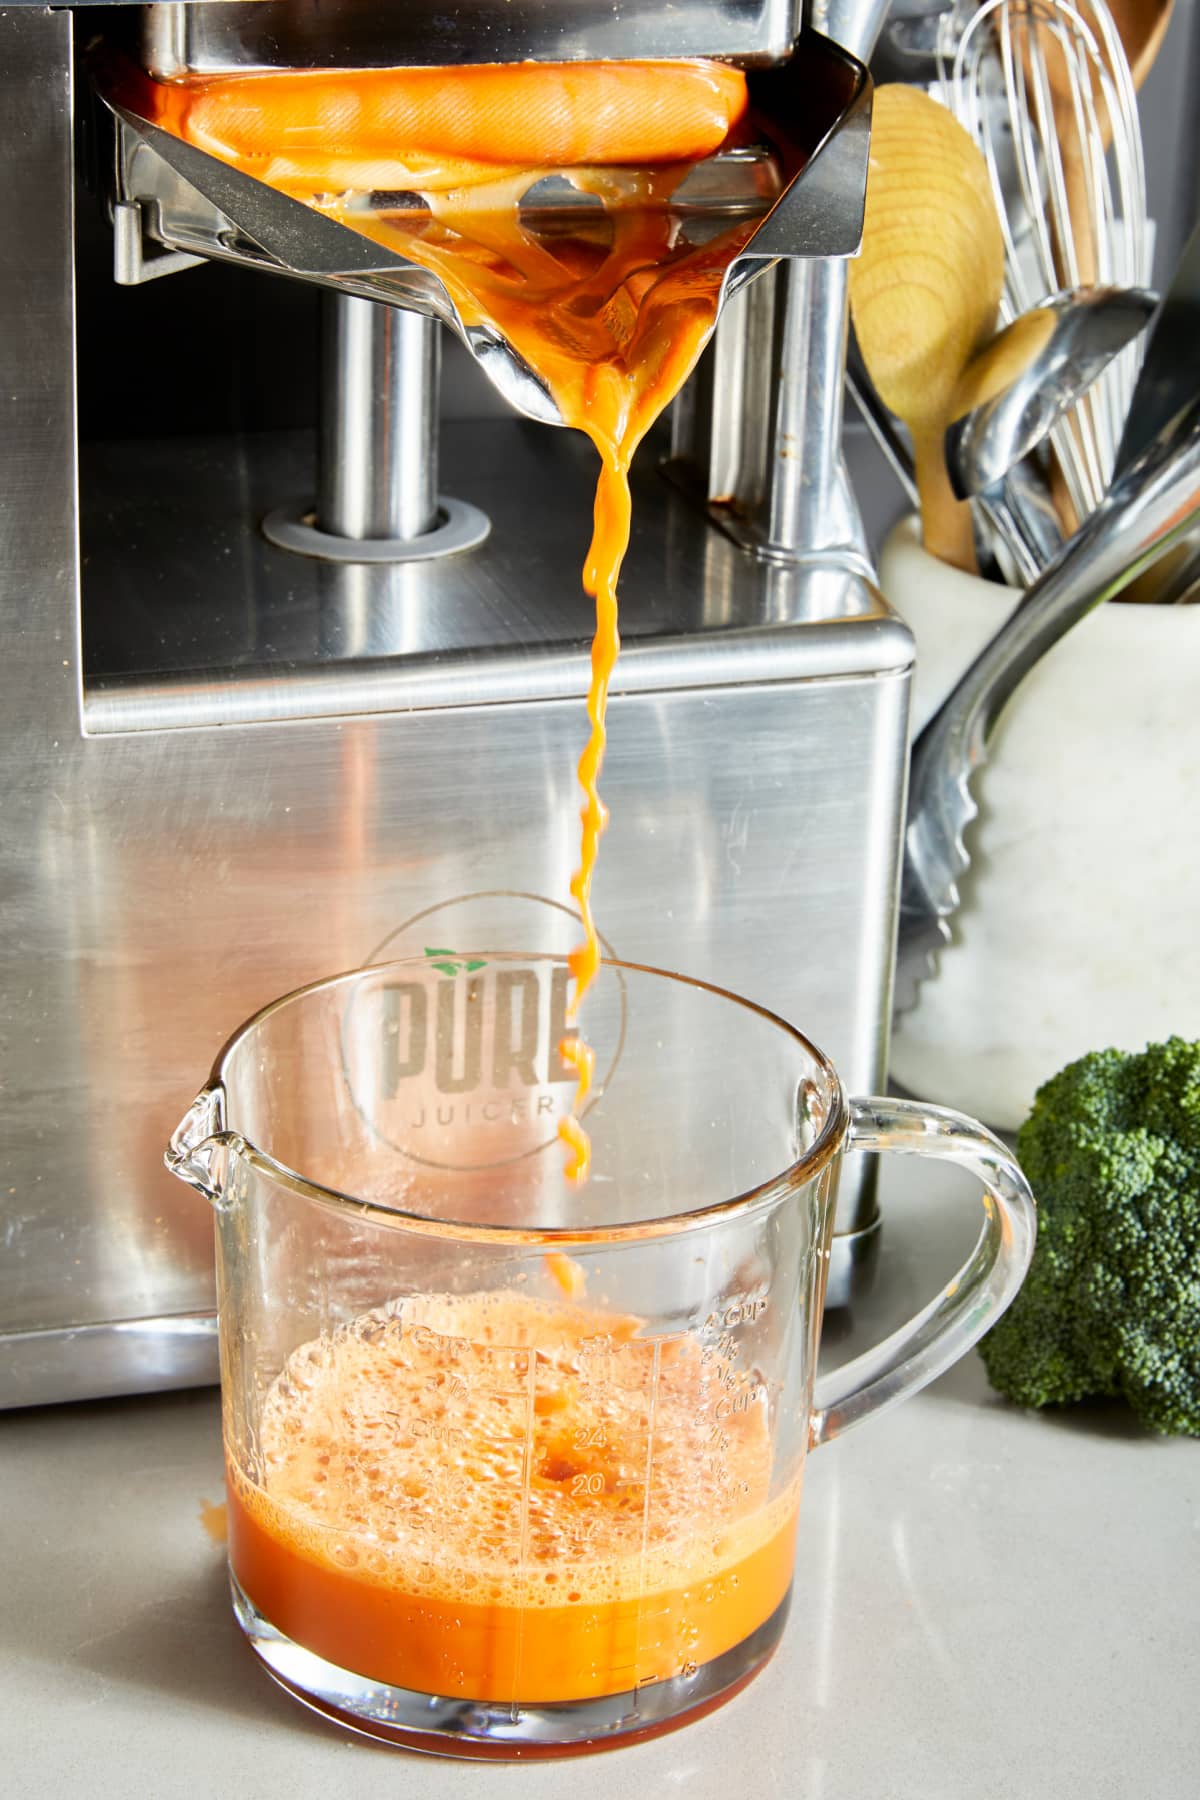 A brushed stainless steel juicer pours bright orange immune boosting juice out into a glass pitcher with a handle.